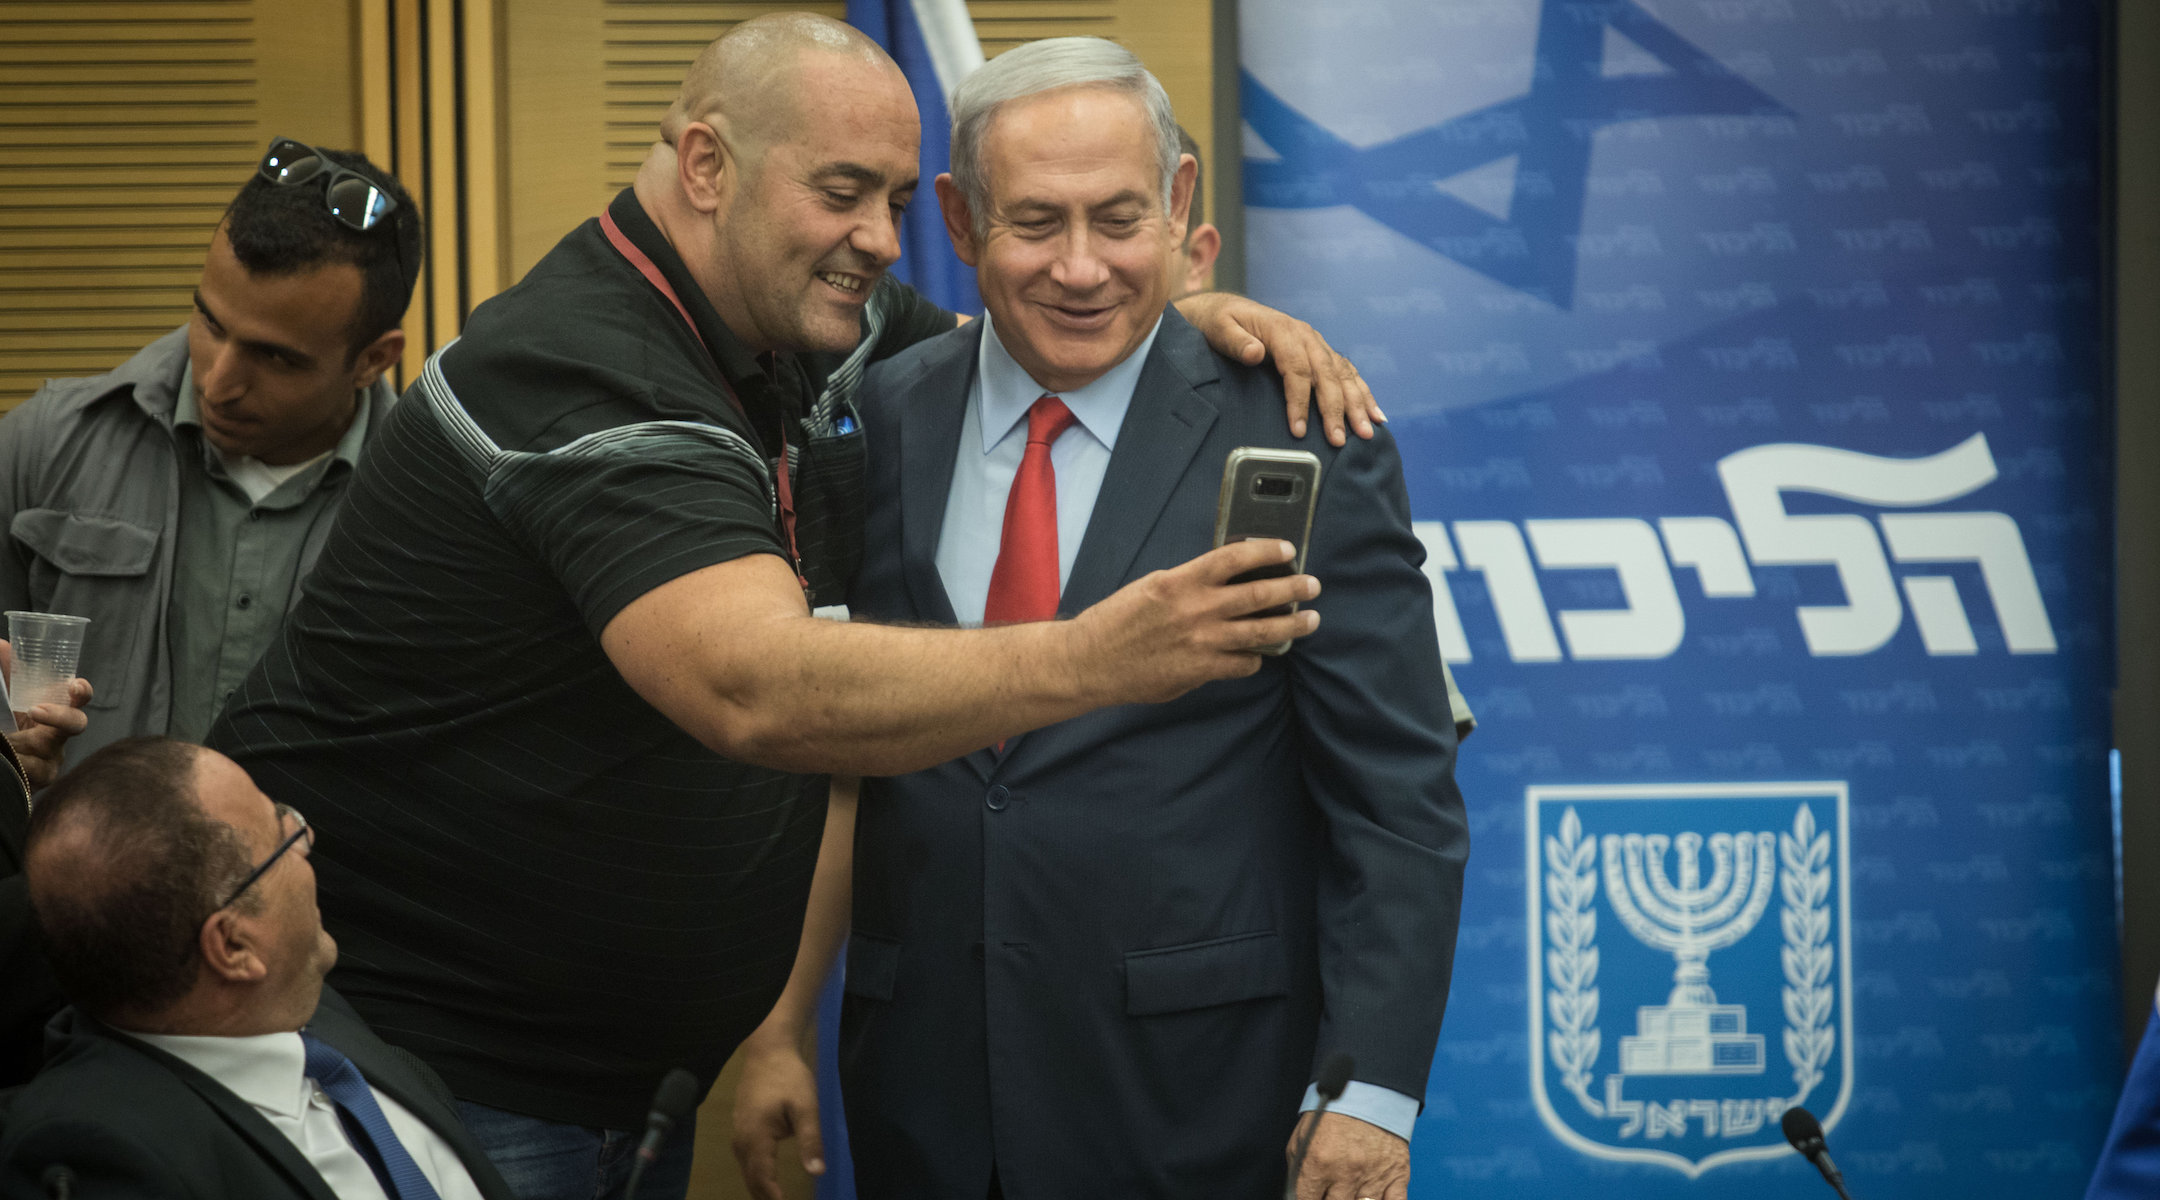 Prime Minister Benjamin Netanyahu poses for a selfie with Itzik Zarka, a Likud activist, during a Likud Party faction meeting at the Knesset, Israel’s parliament, on July 9, 2018. (Hadas Parush/Flash90)